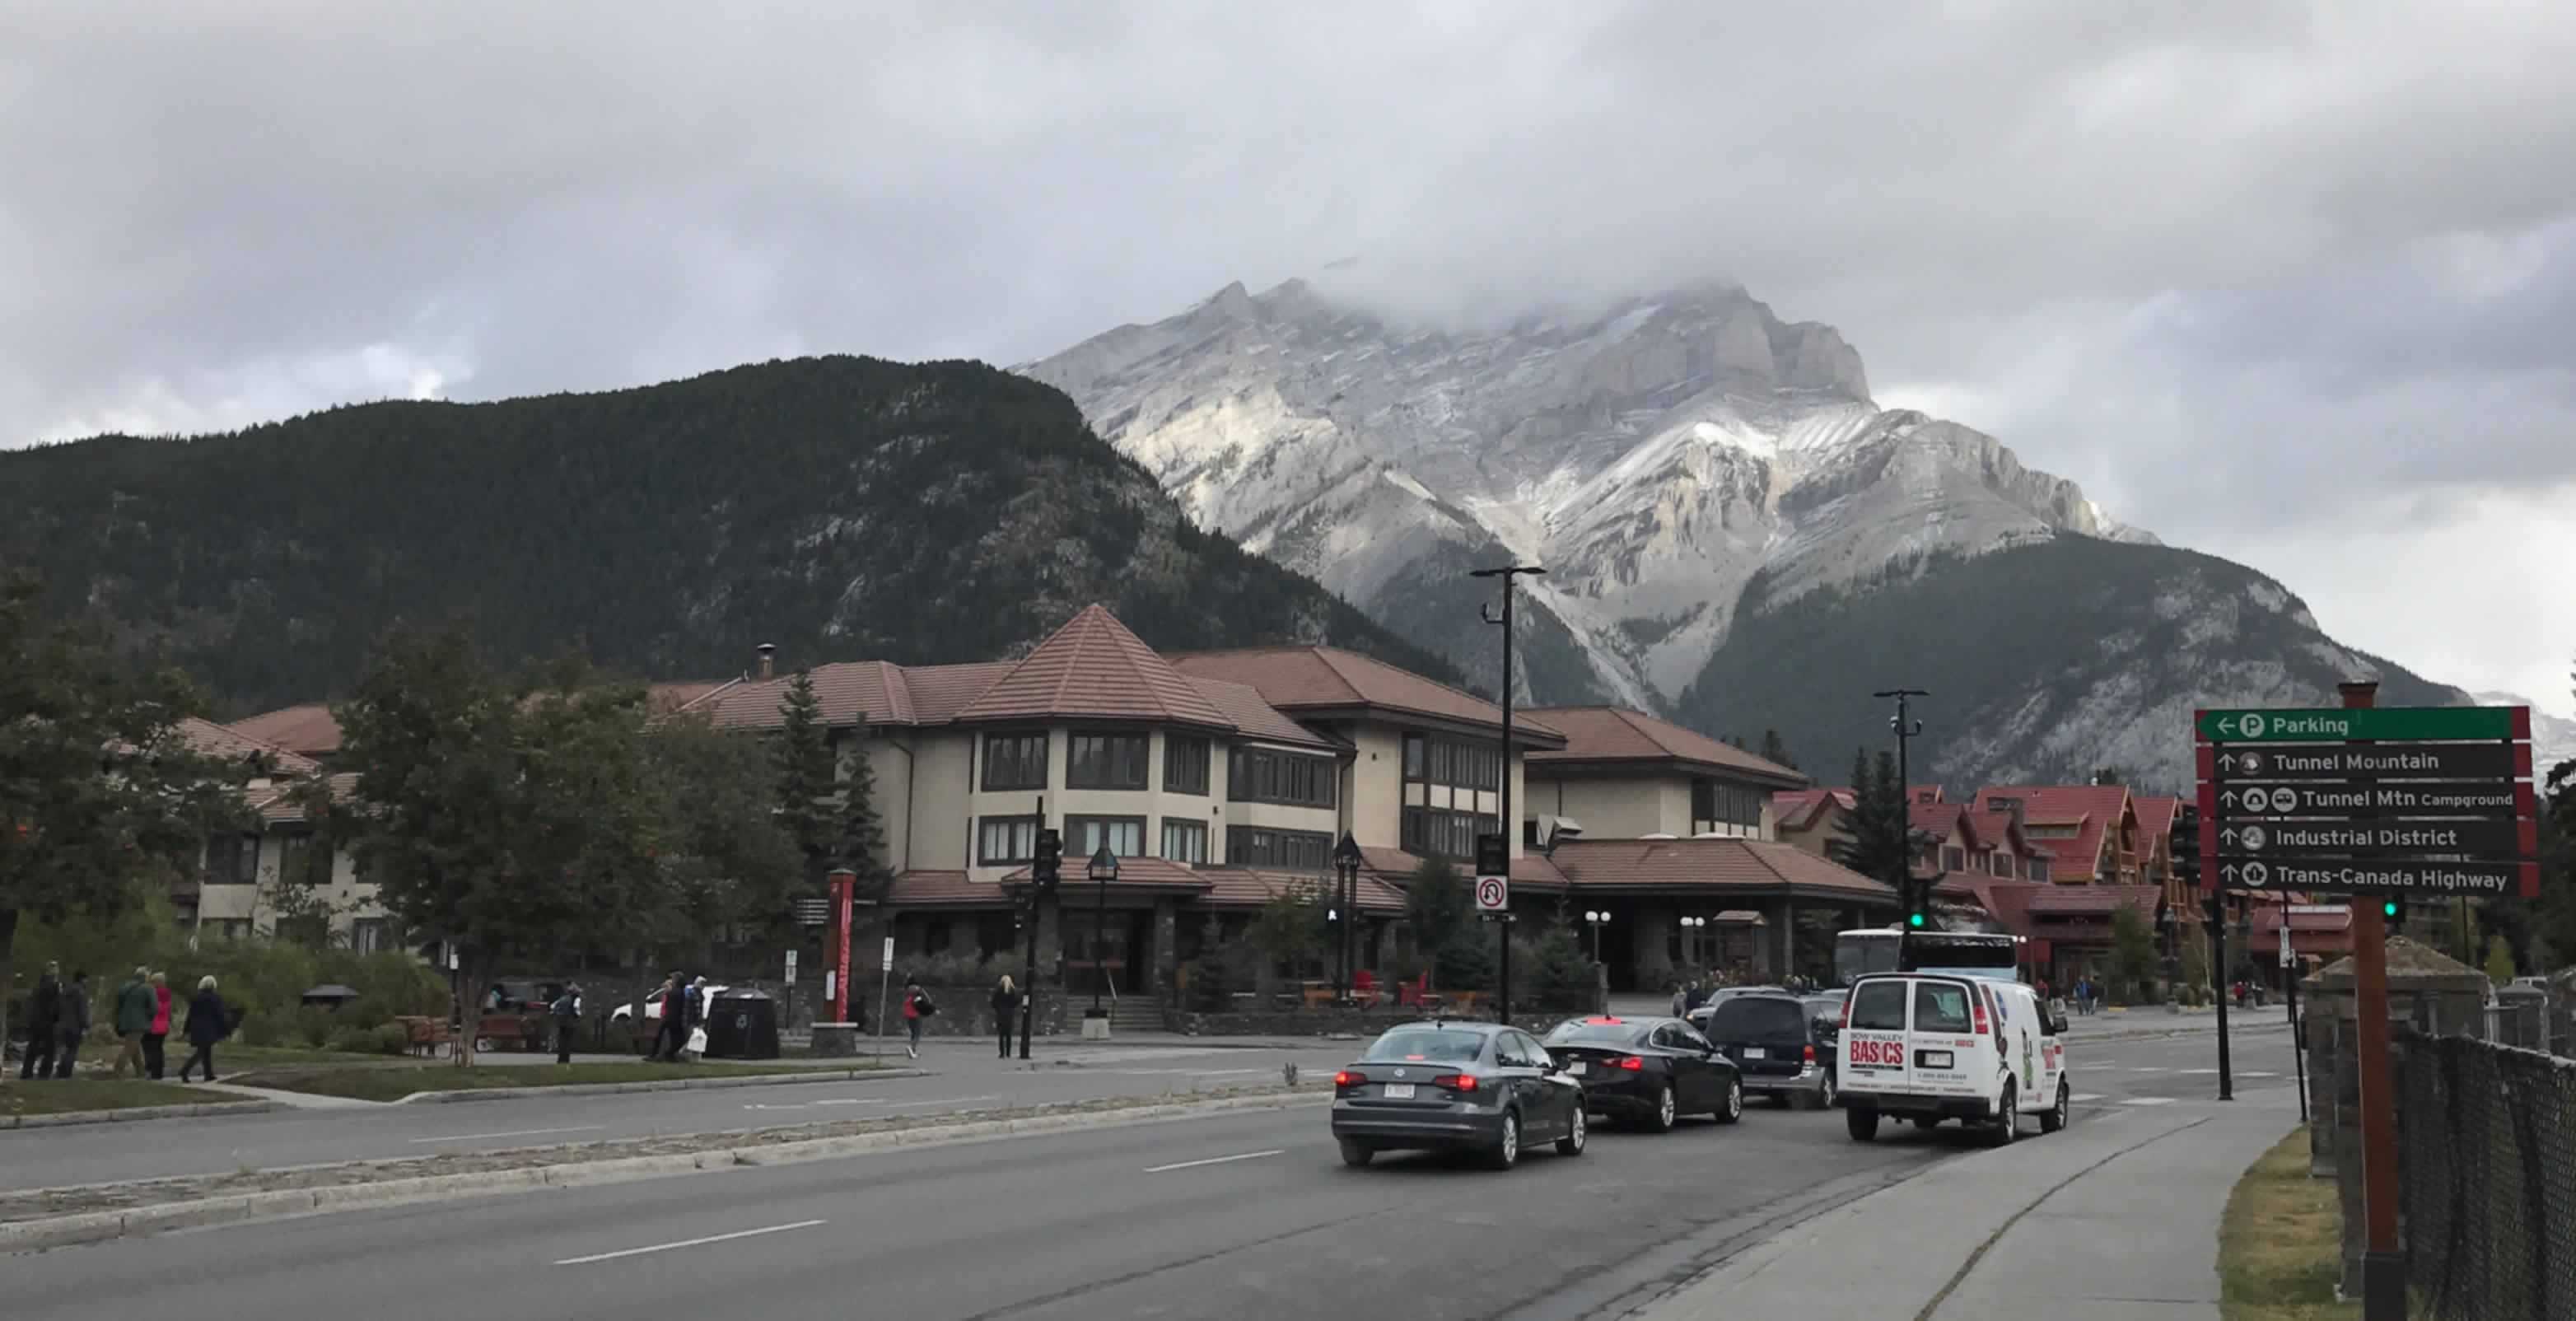 Banff Avenue, looking north, with the red roofs of the Moose Hotel on the left in the distance